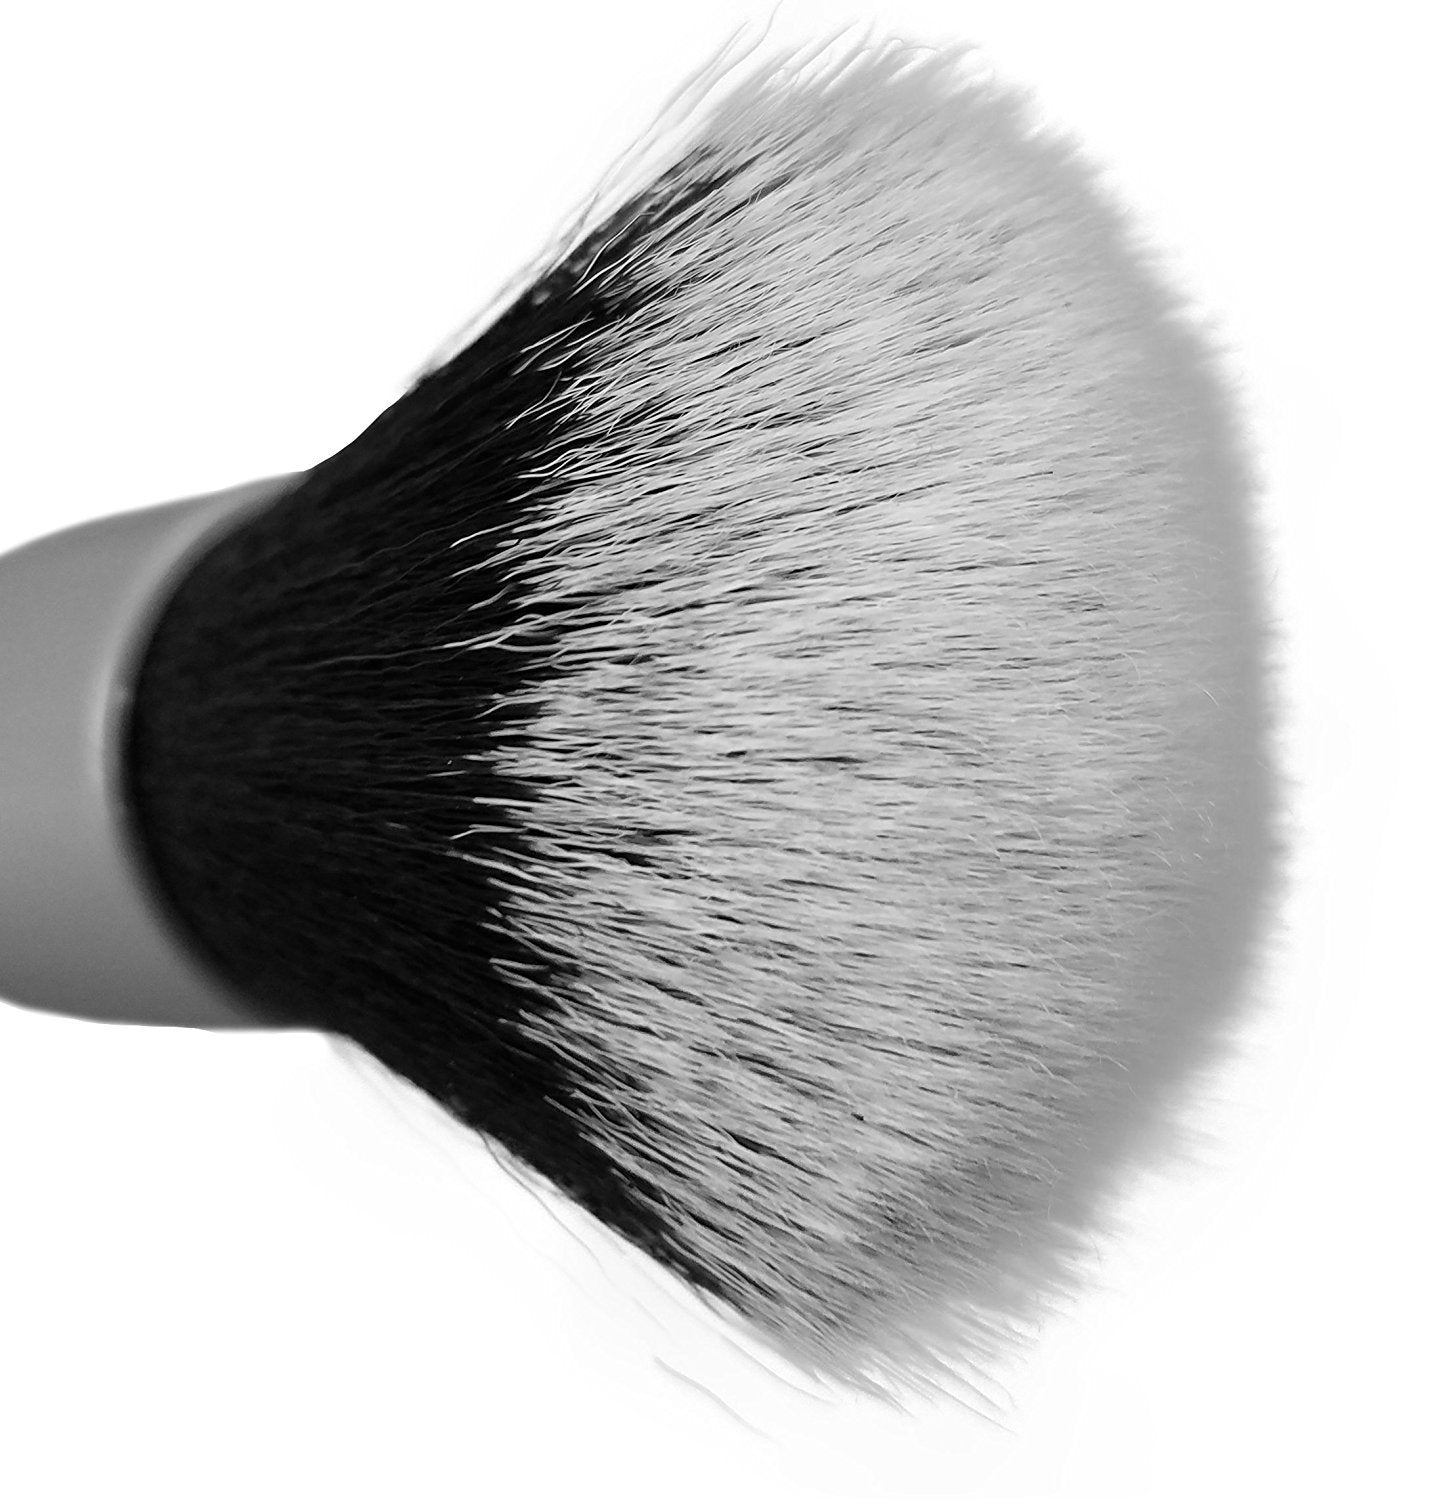 Detail Factory Grey Ultra-Soft Detailing Brush - Small